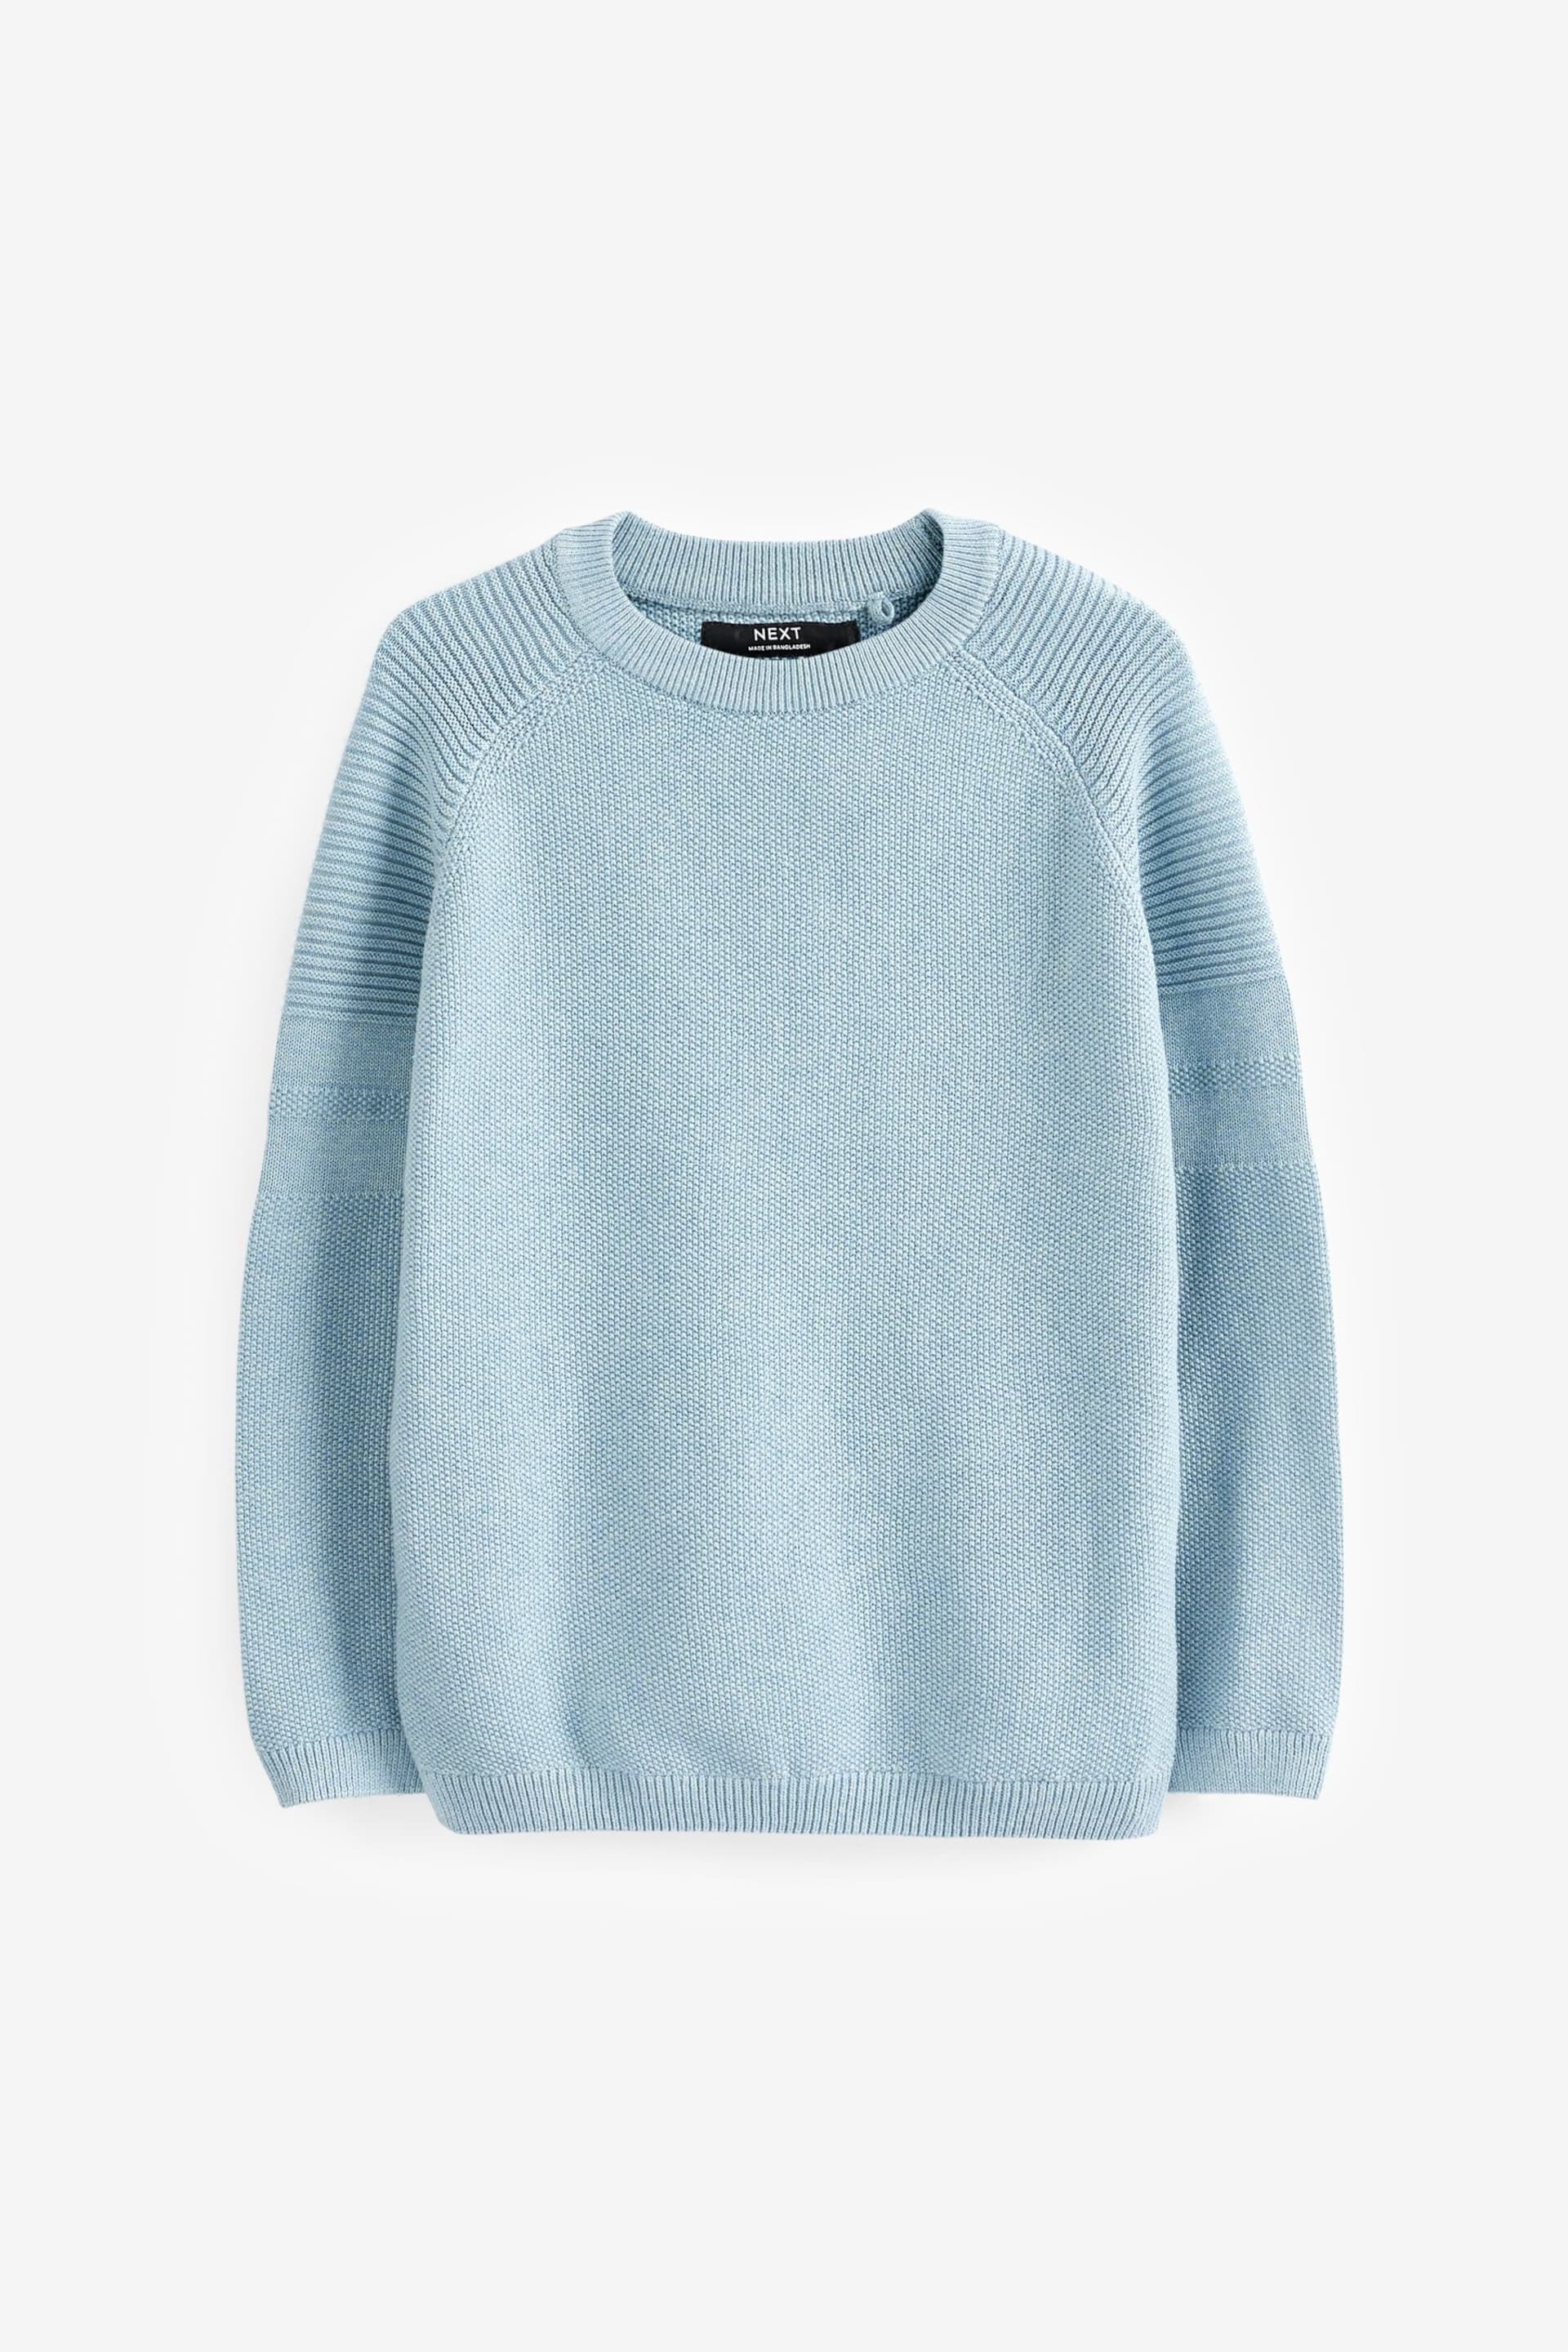 Blue Without Stag Textured Crew Jumper (3-16yrs) - Image 1 of 2